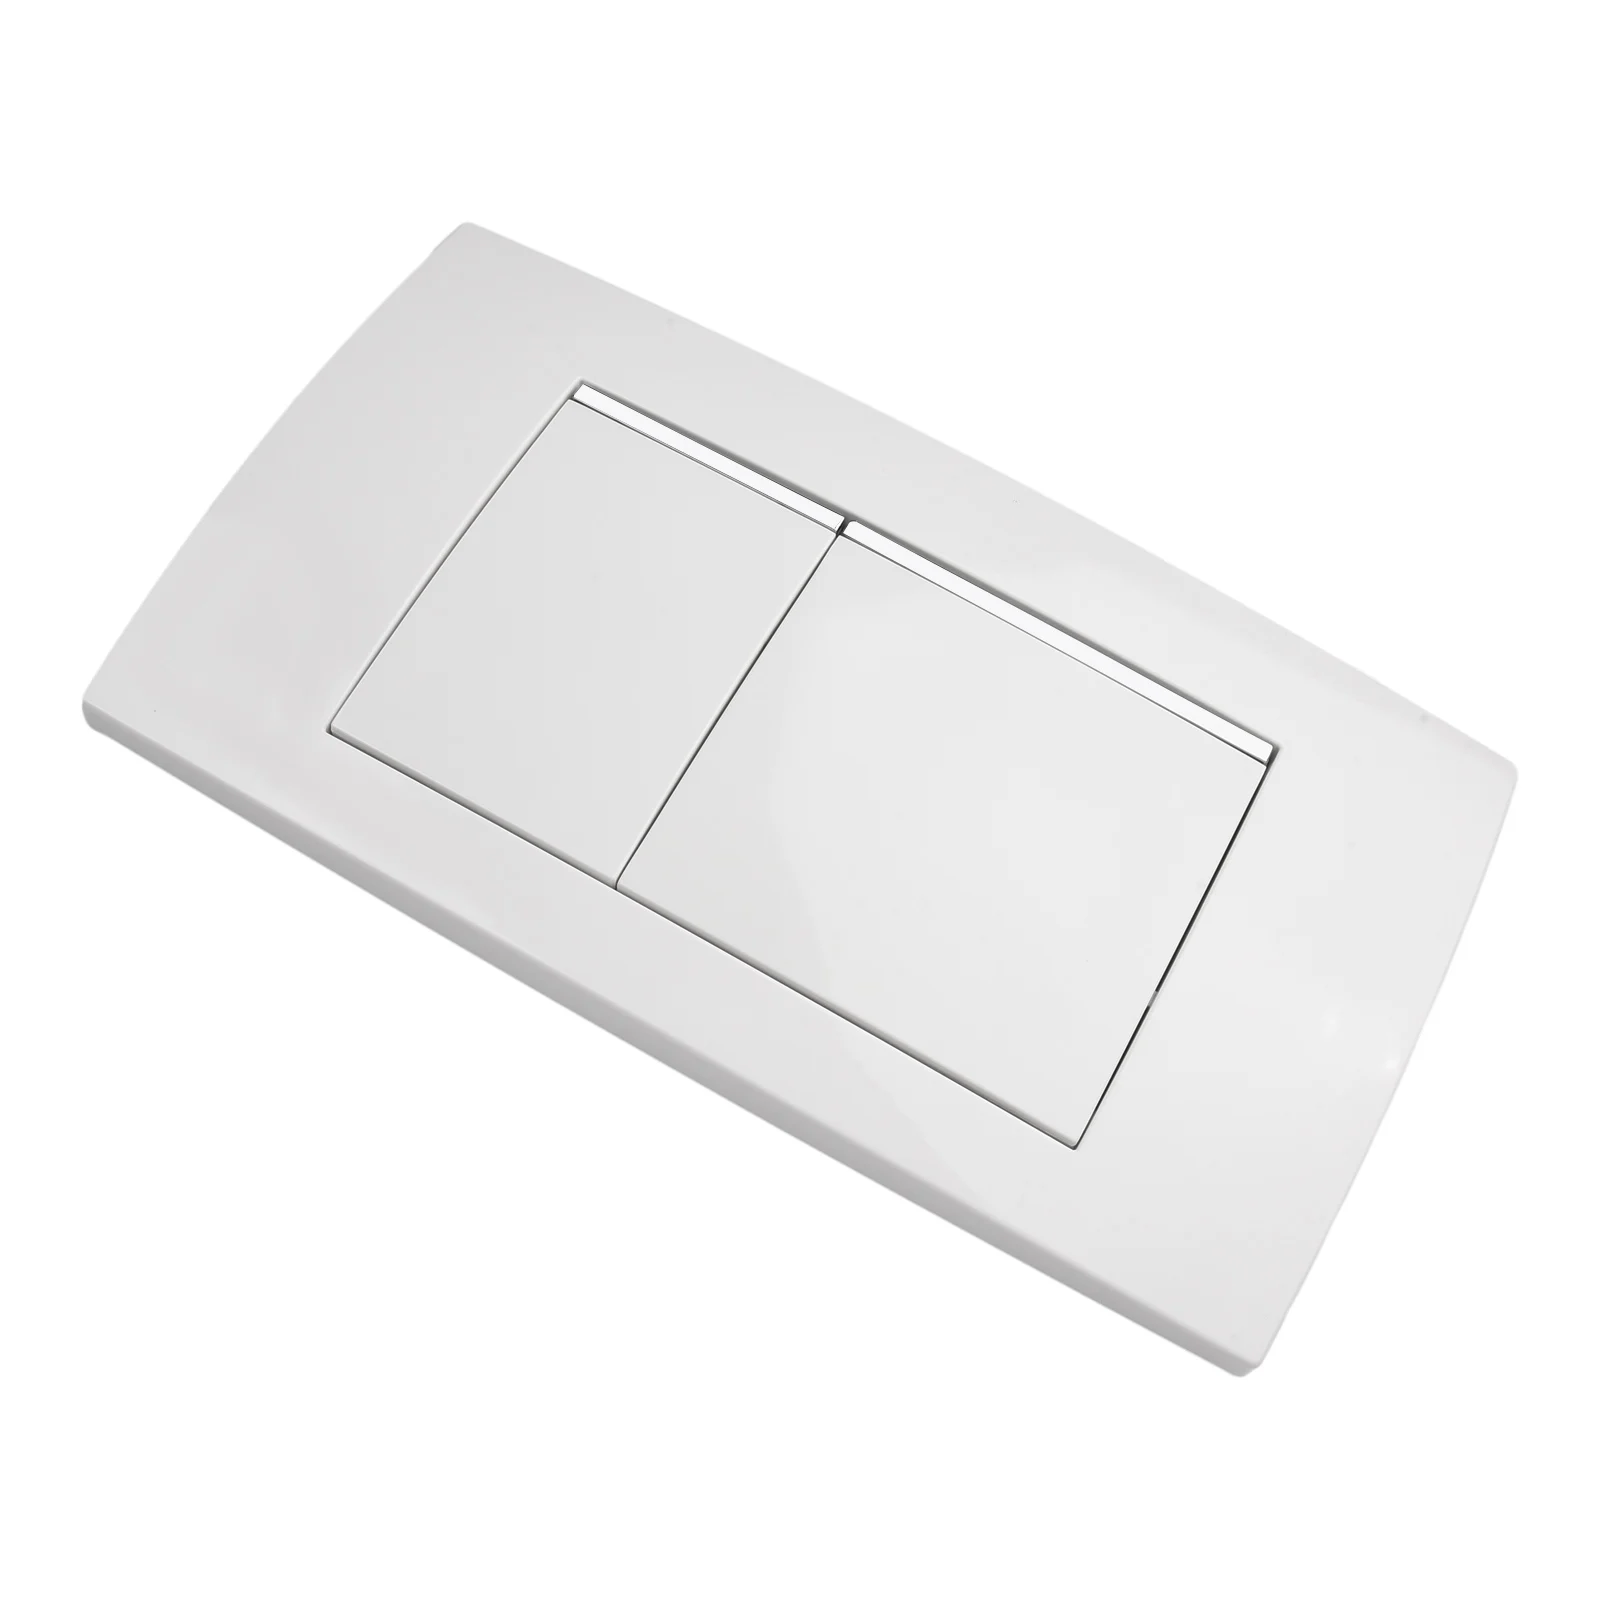 

Button Dual Flush Plate Bathroom Accessories Plastic Press Switch Replacement Toilet Water Tank White For Geberit Twinline 30